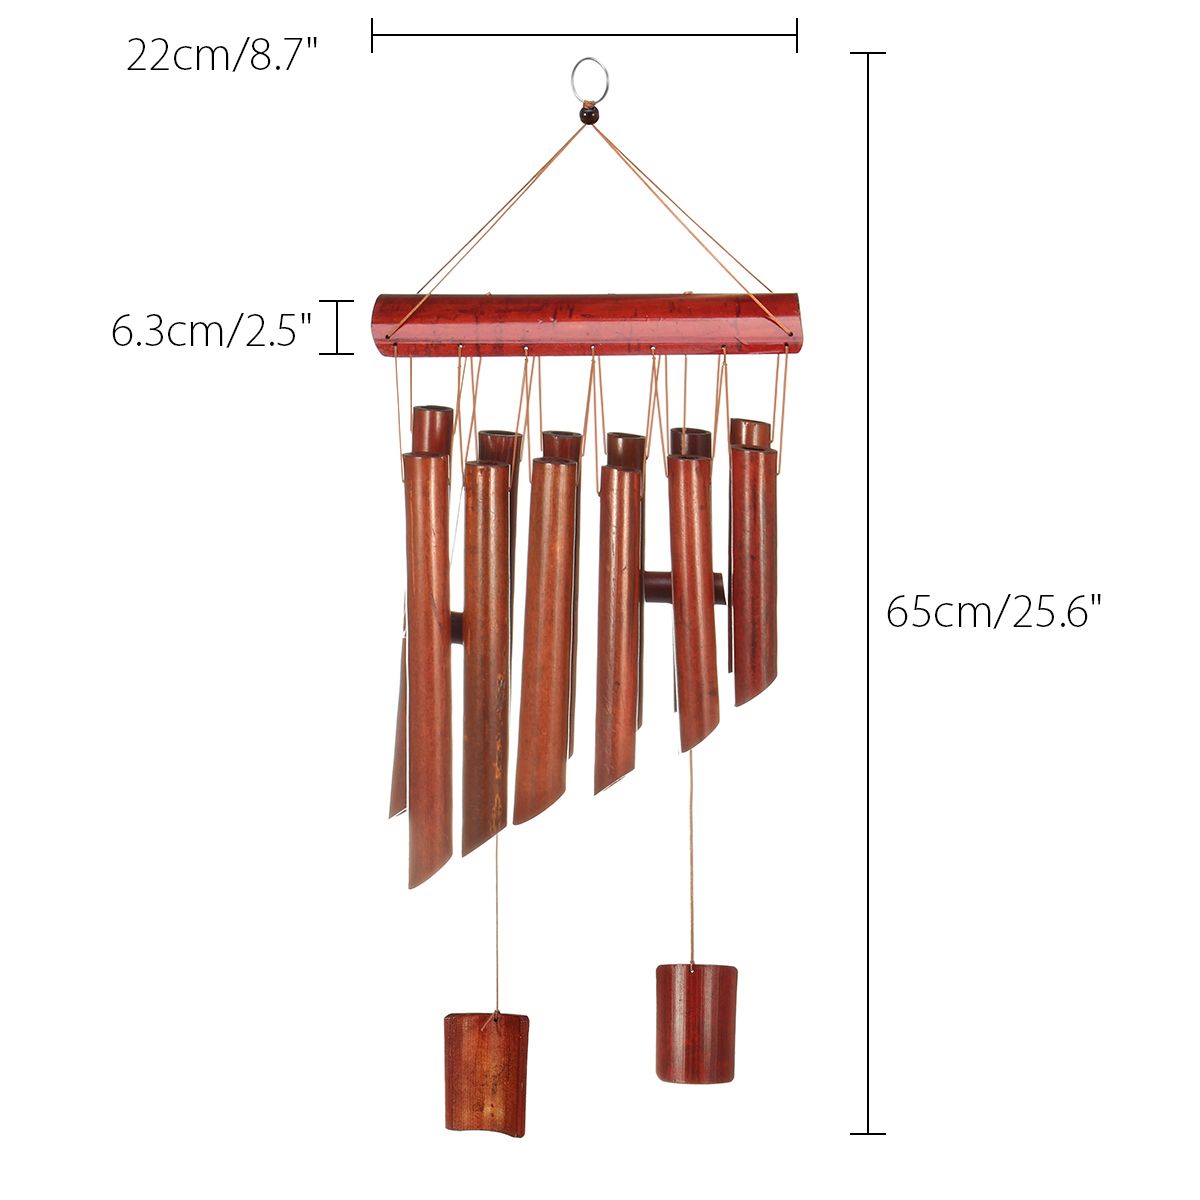 12-Tubes-Bamboo-Wind-Chime-Wooden-Garden-Yark-Patio-Home-Decorations-Hanging-Ornament-1513581